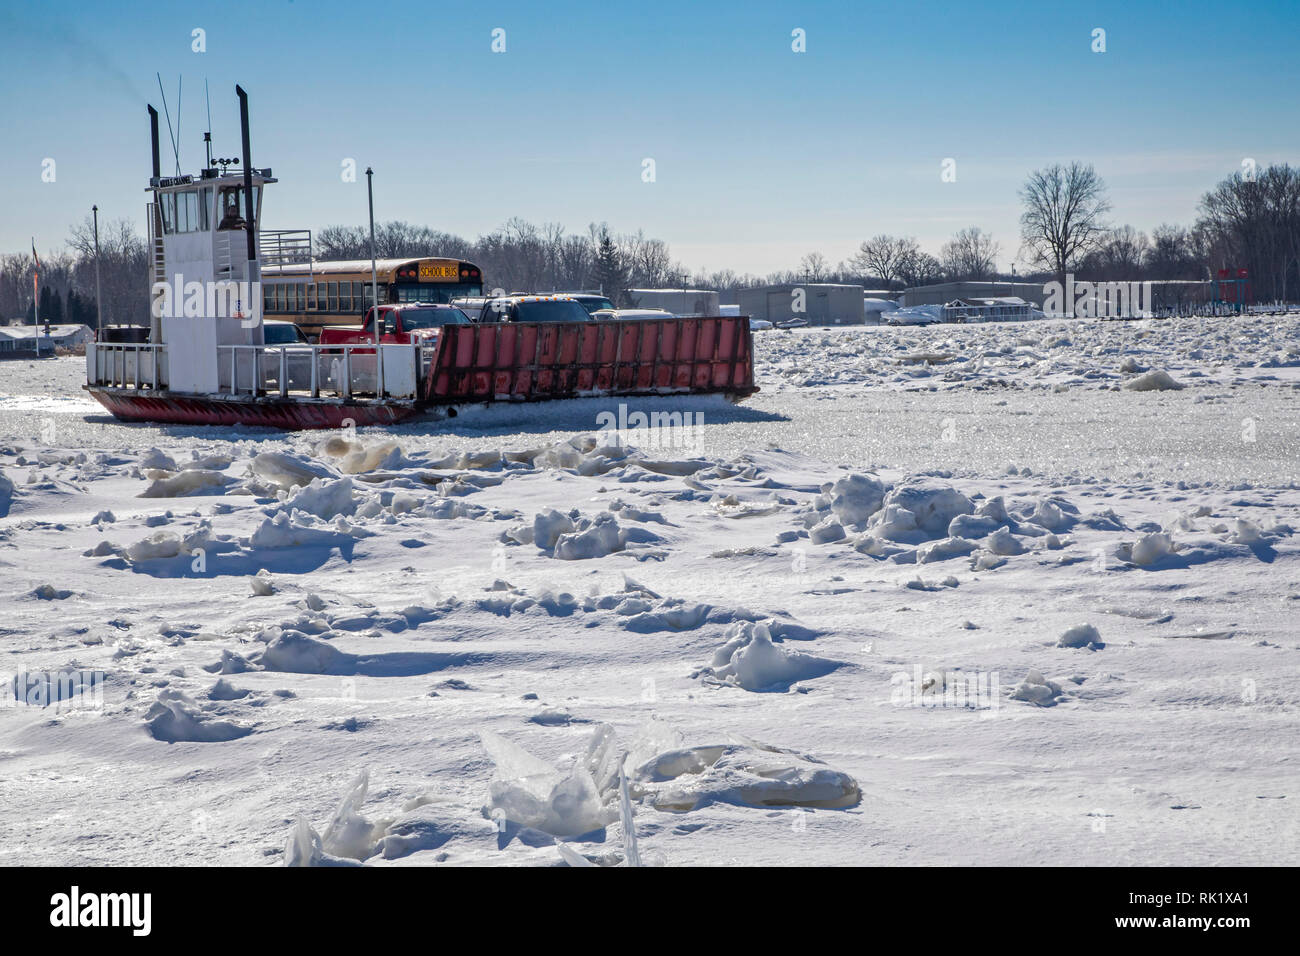 Algonac, Michigan - A car ferry sails through the ice-filled St. Clair River between Harsens Island and the Michigan mainland. Stock Photo